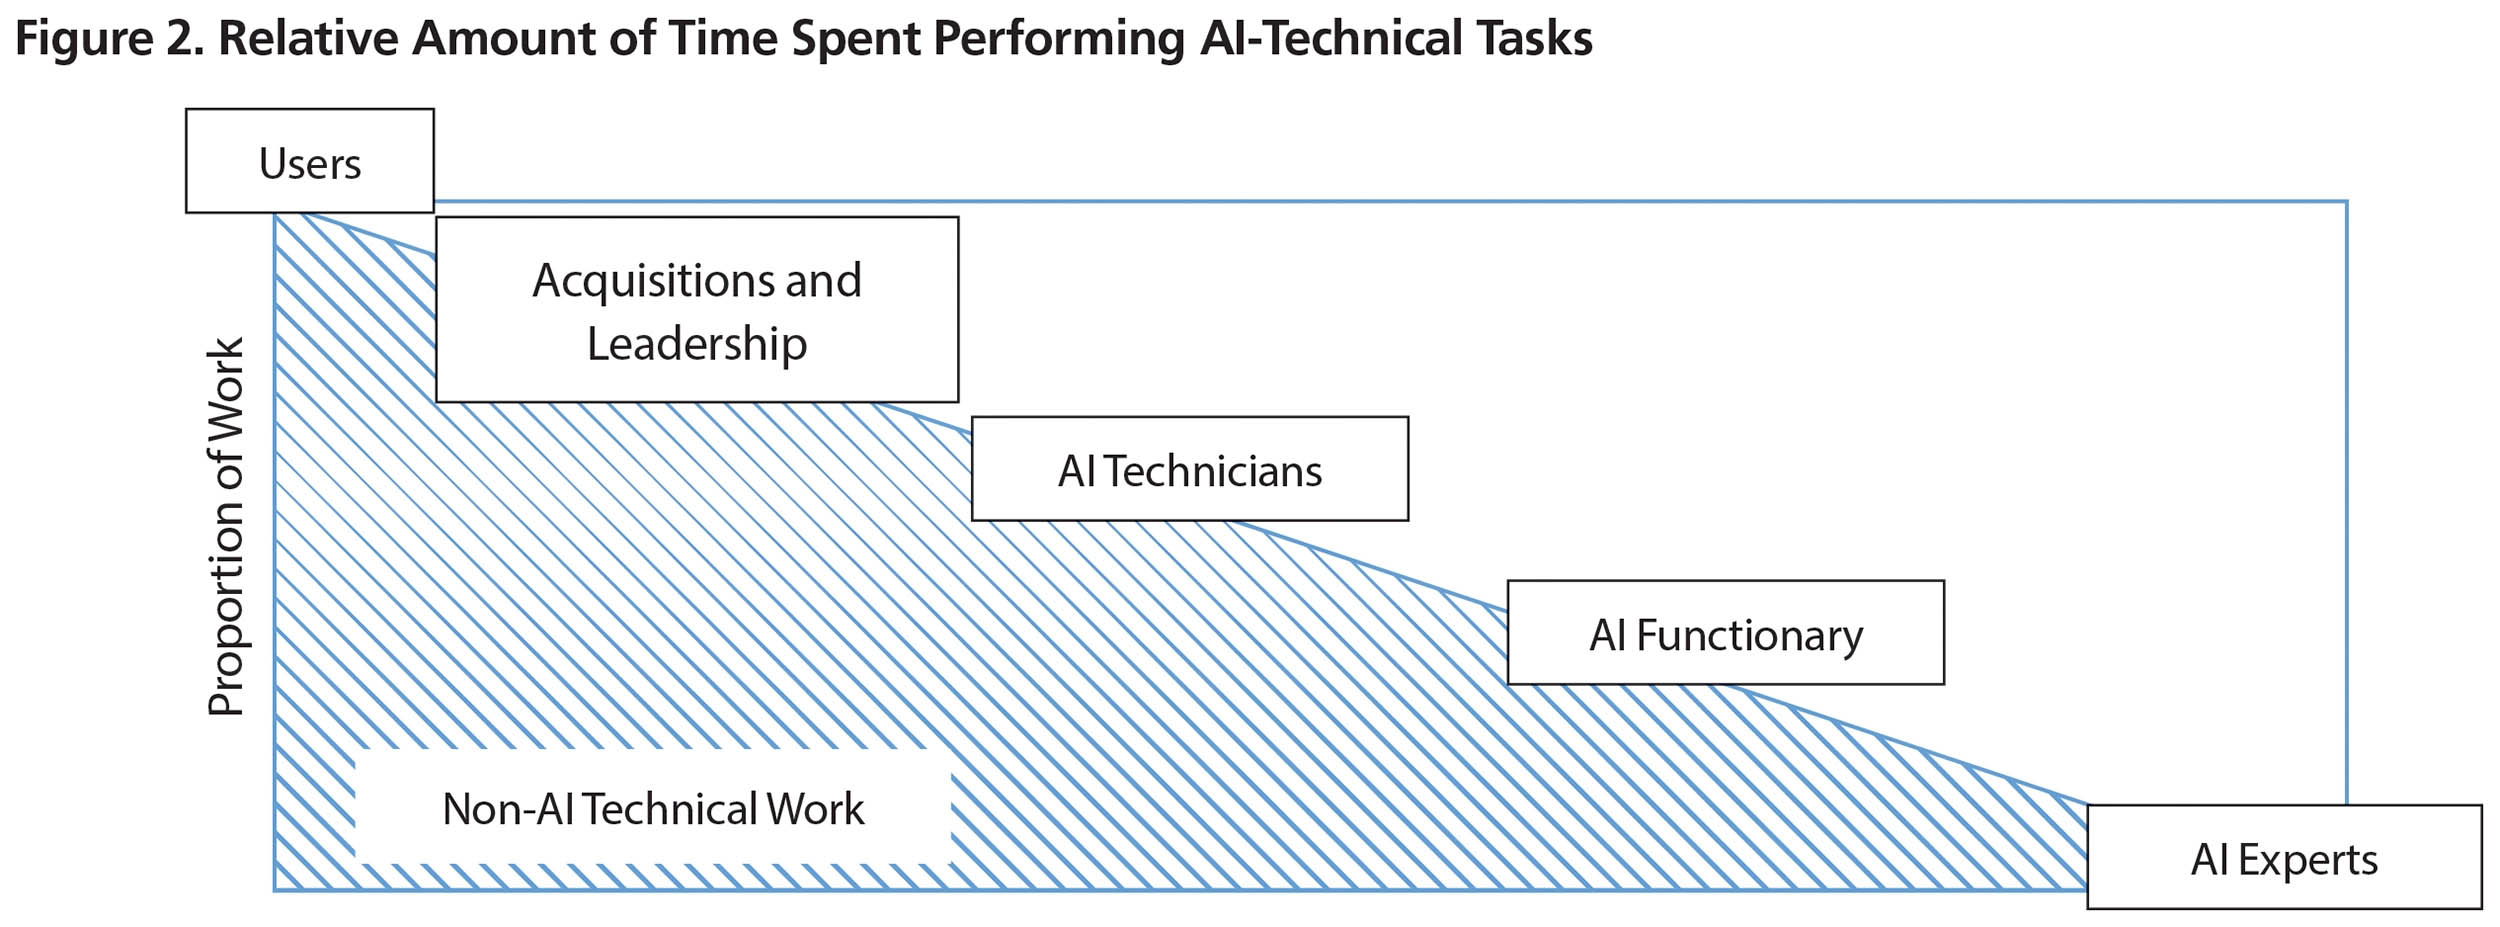 Figure 2. Relative Amount of Time Spent Performing AI-Technical Tasks